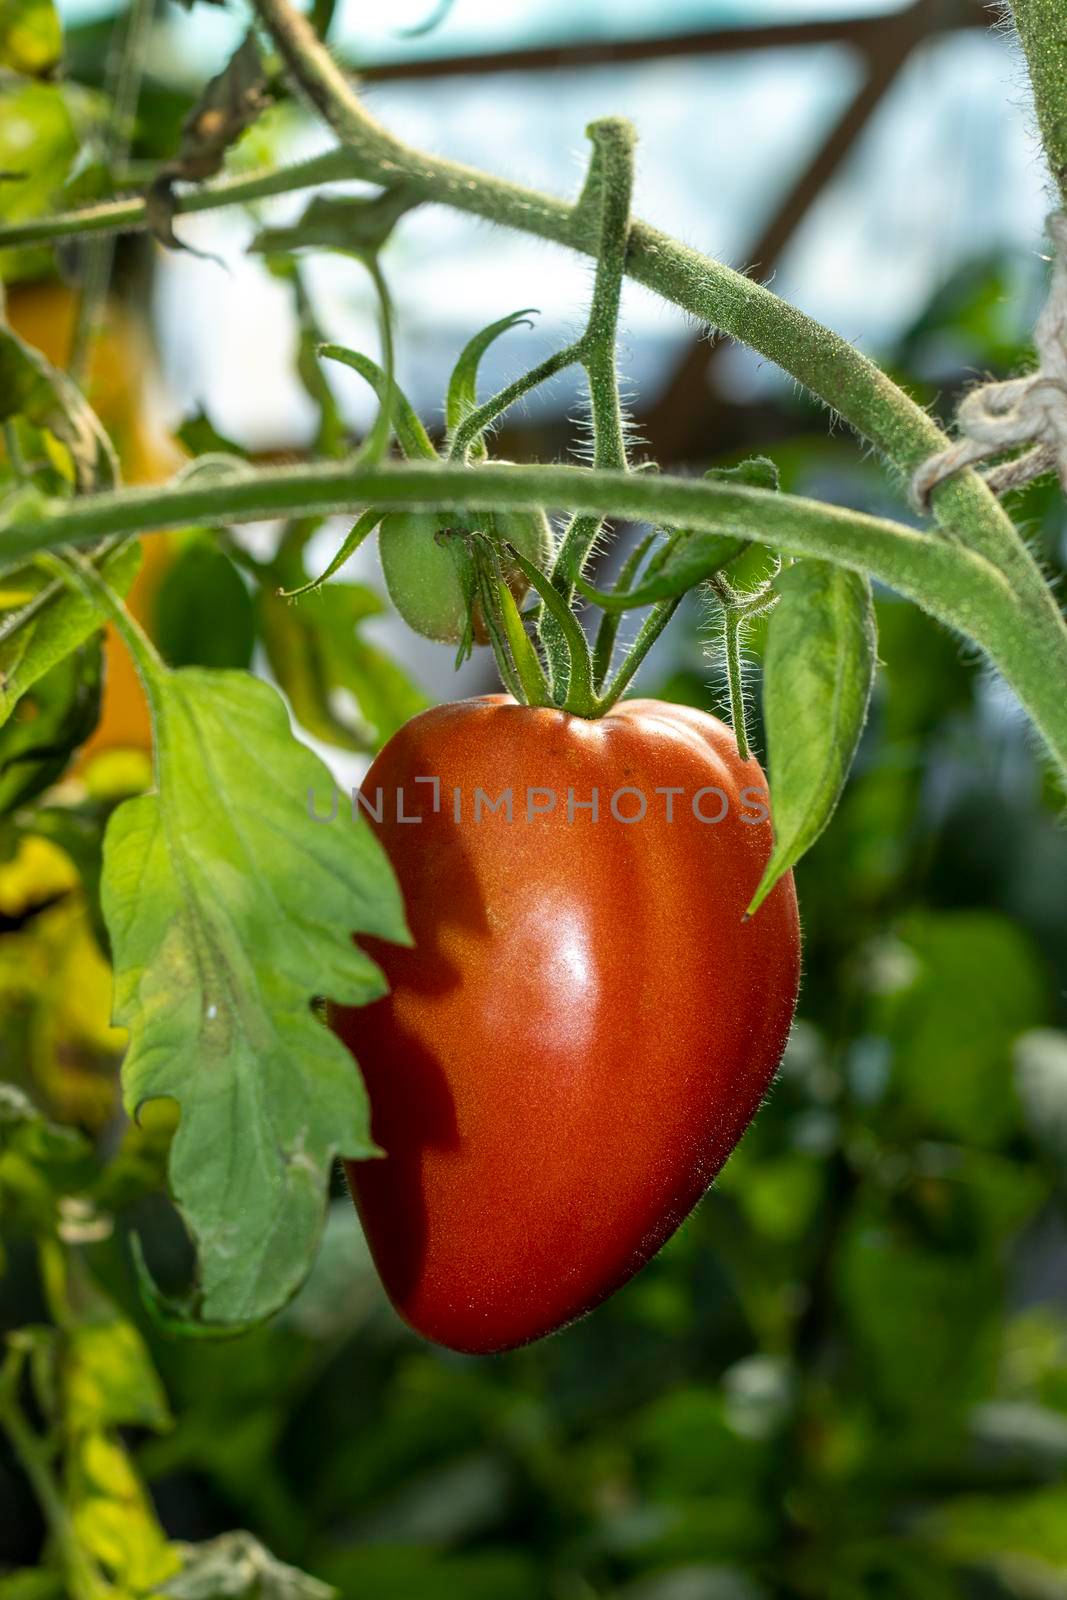 A long tomato on the branch ready to turn red in the greenhouse